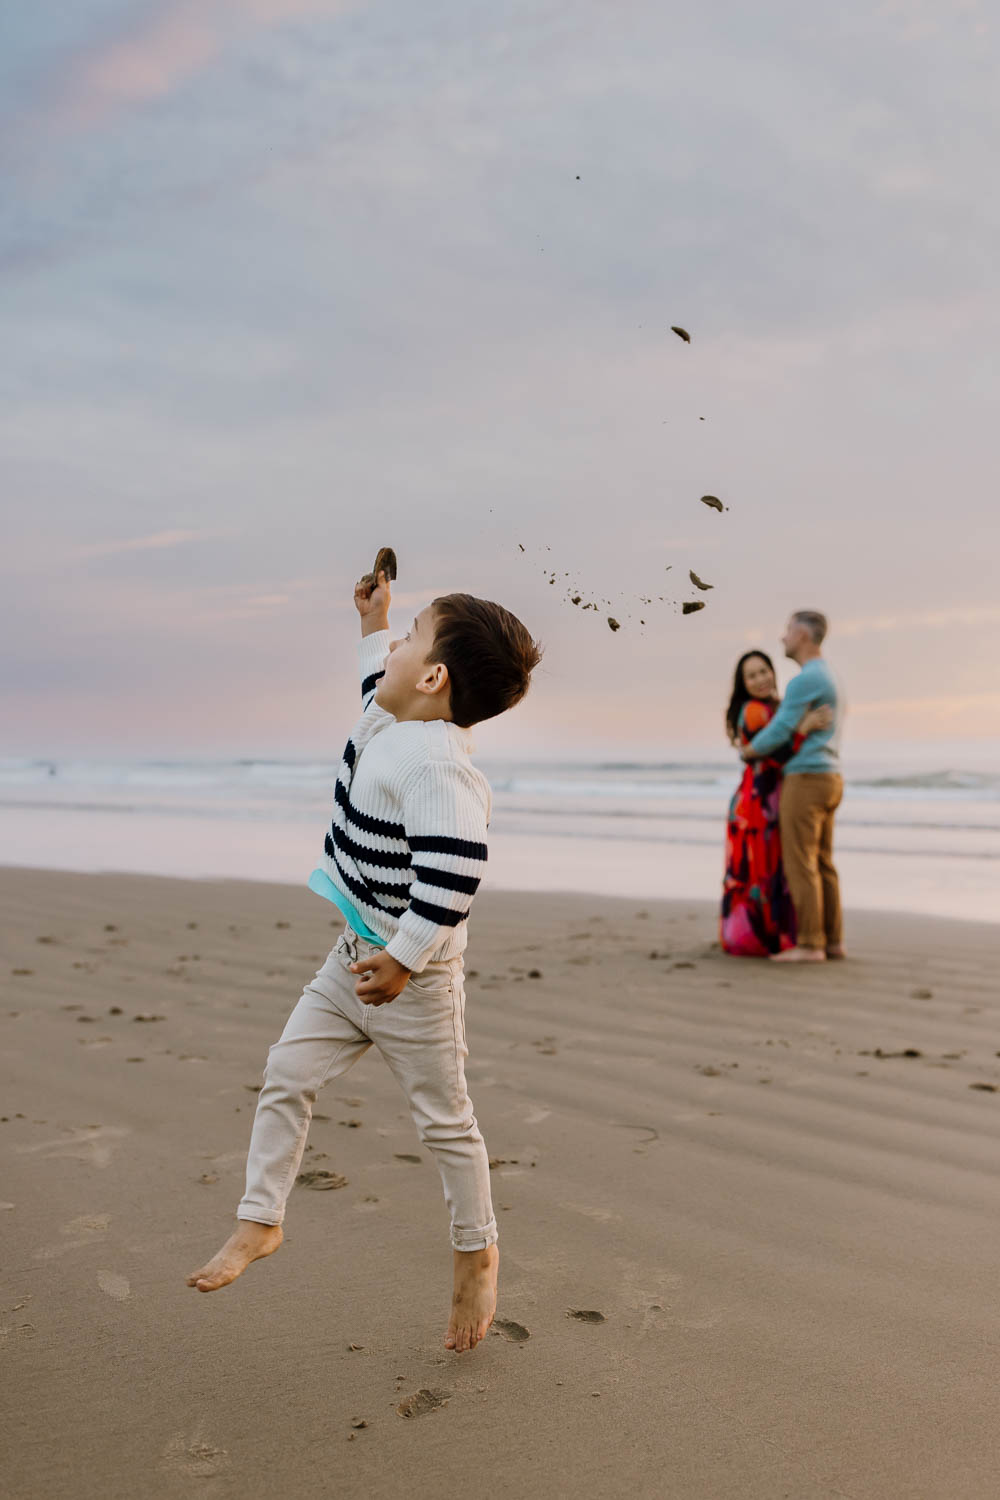 Little boy throwing sand while parents watch